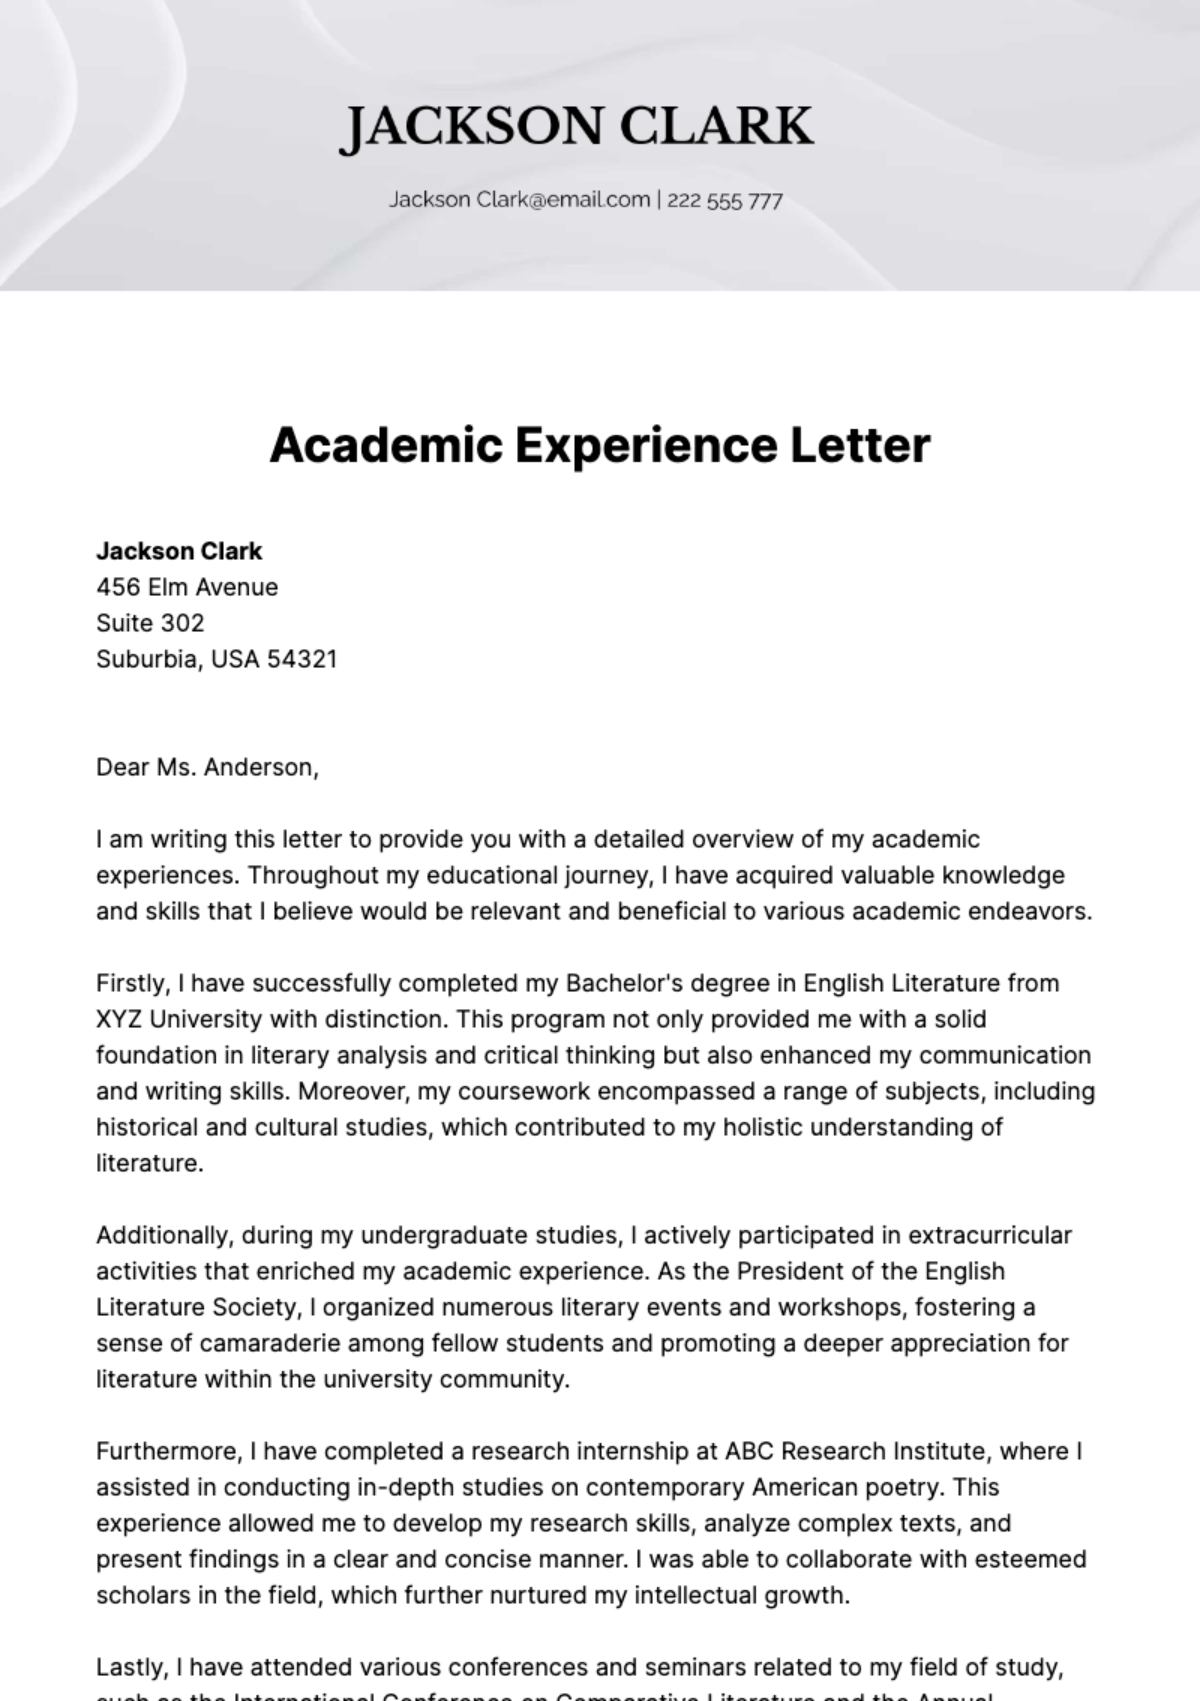 Free Academic Experience Letter Template